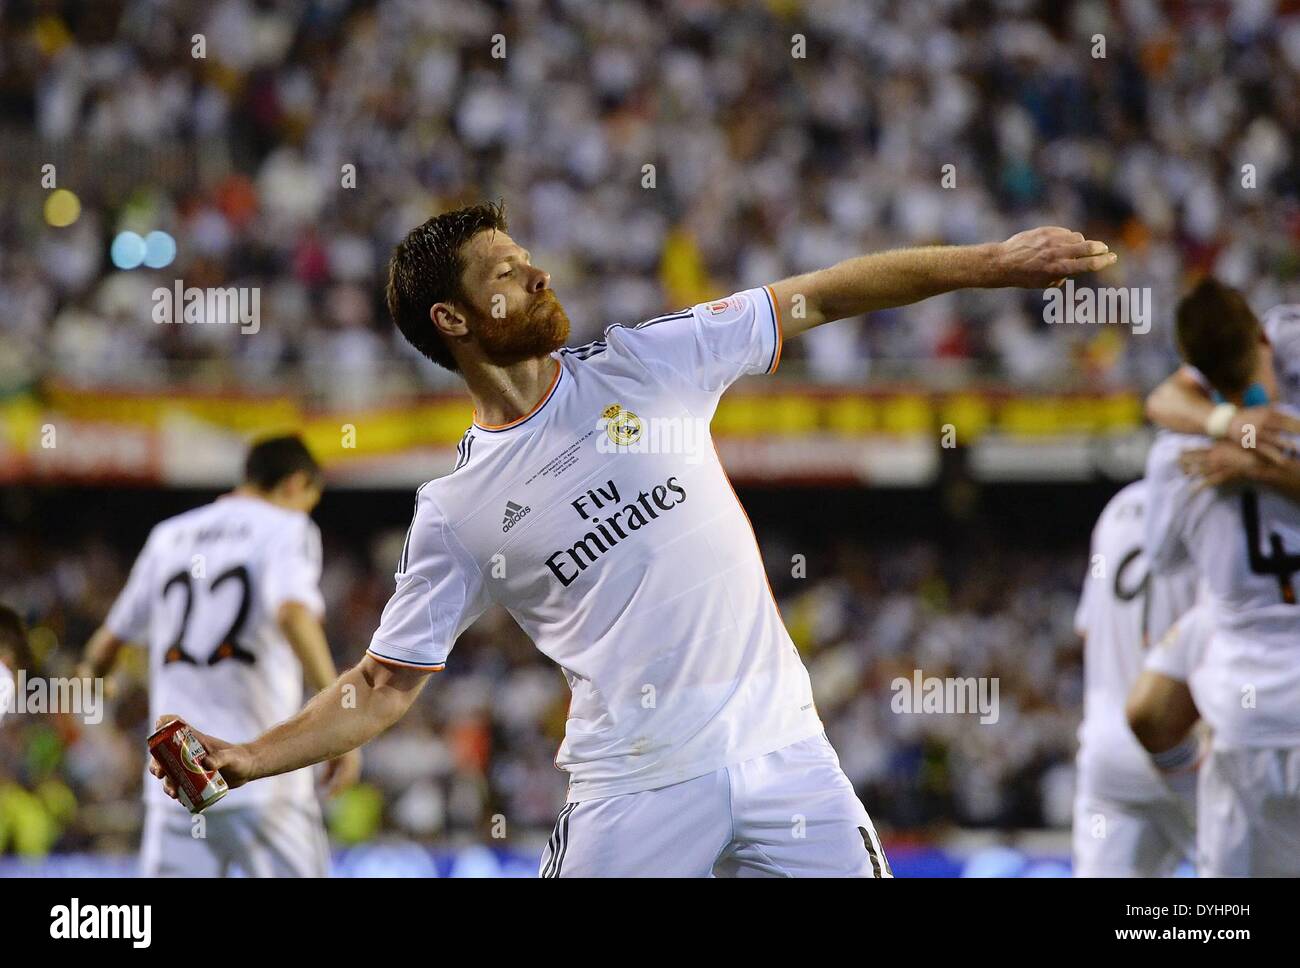 Mestalla, Valencia, Spain. 16th Apr, 2014. Copa Del Rey Cup final. Barcelona versus Real Madrid. Xabi Alonso © Action Plus Sports/Alamy Live News Stock Photo